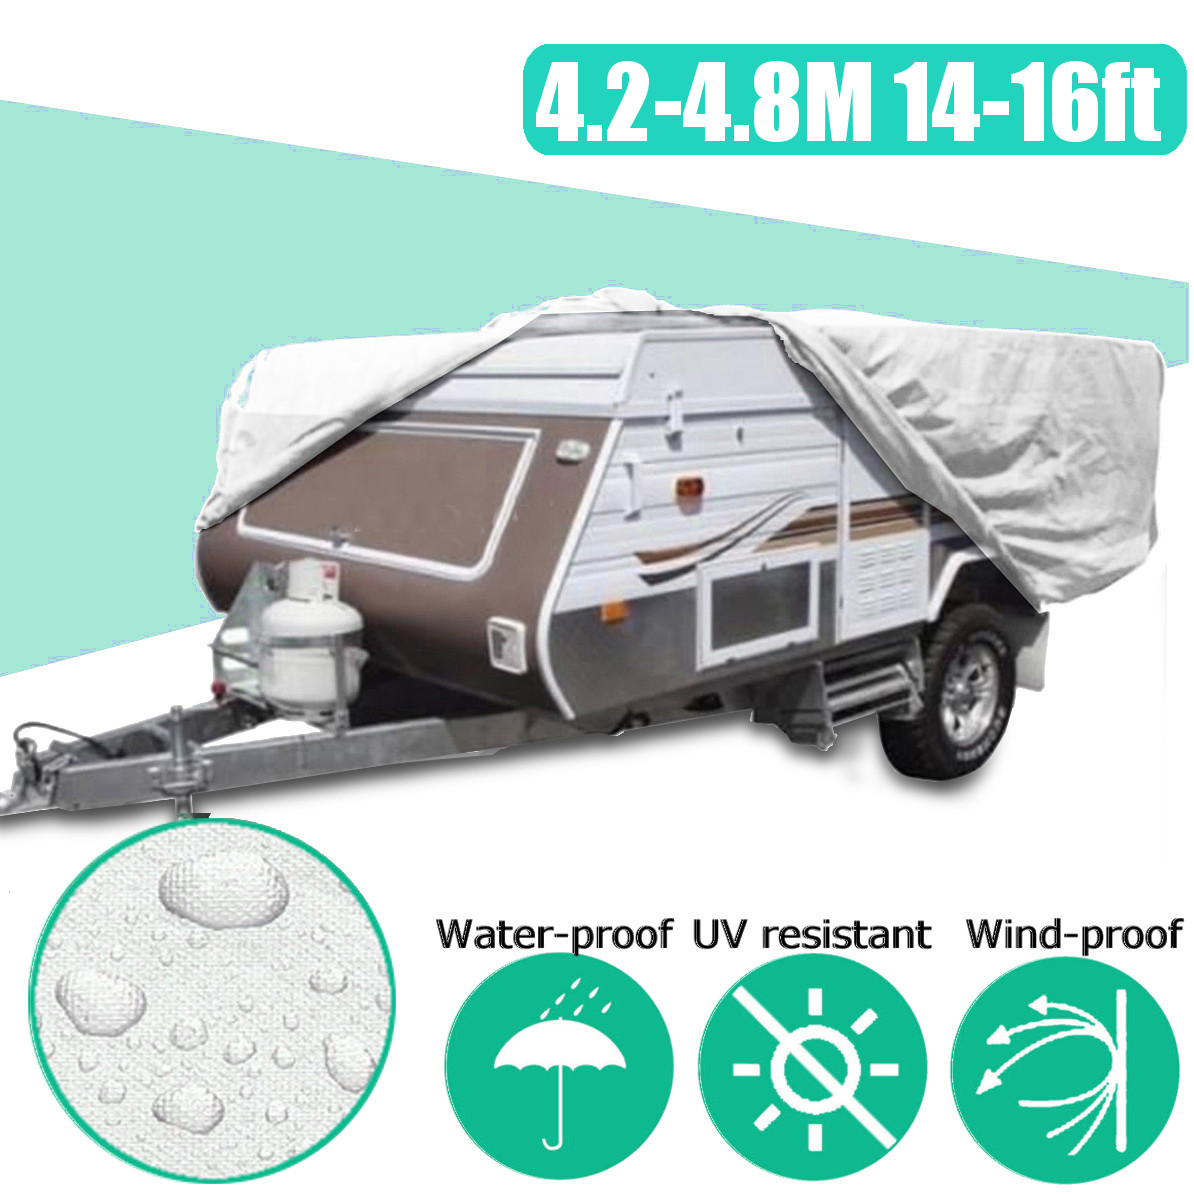 14-16ft-Pop-Up-Folding-Waterproof-Anti-UV-Camper-Tent-Trailer-Storage-Cover-With-Fixed-Ring-1344227